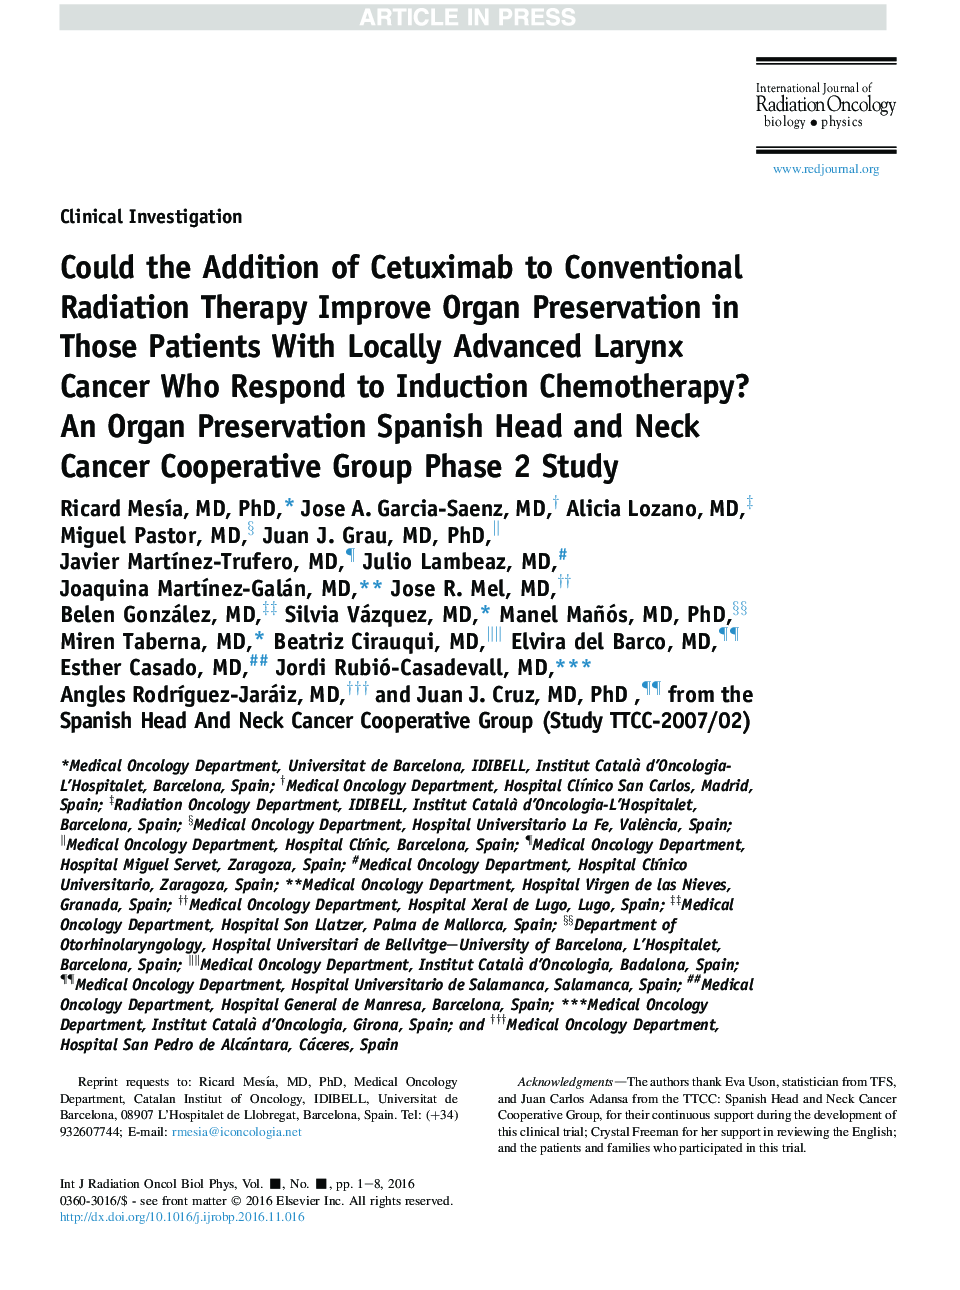 Could the Addition of Cetuximab to Conventional Radiation Therapy Improve Organ Preservation in Those Patients With Locally Advanced Larynx Cancer Who Respond to Induction Chemotherapy? An Organ Preservation Spanish Head and Neck Cancer Cooperative Group 